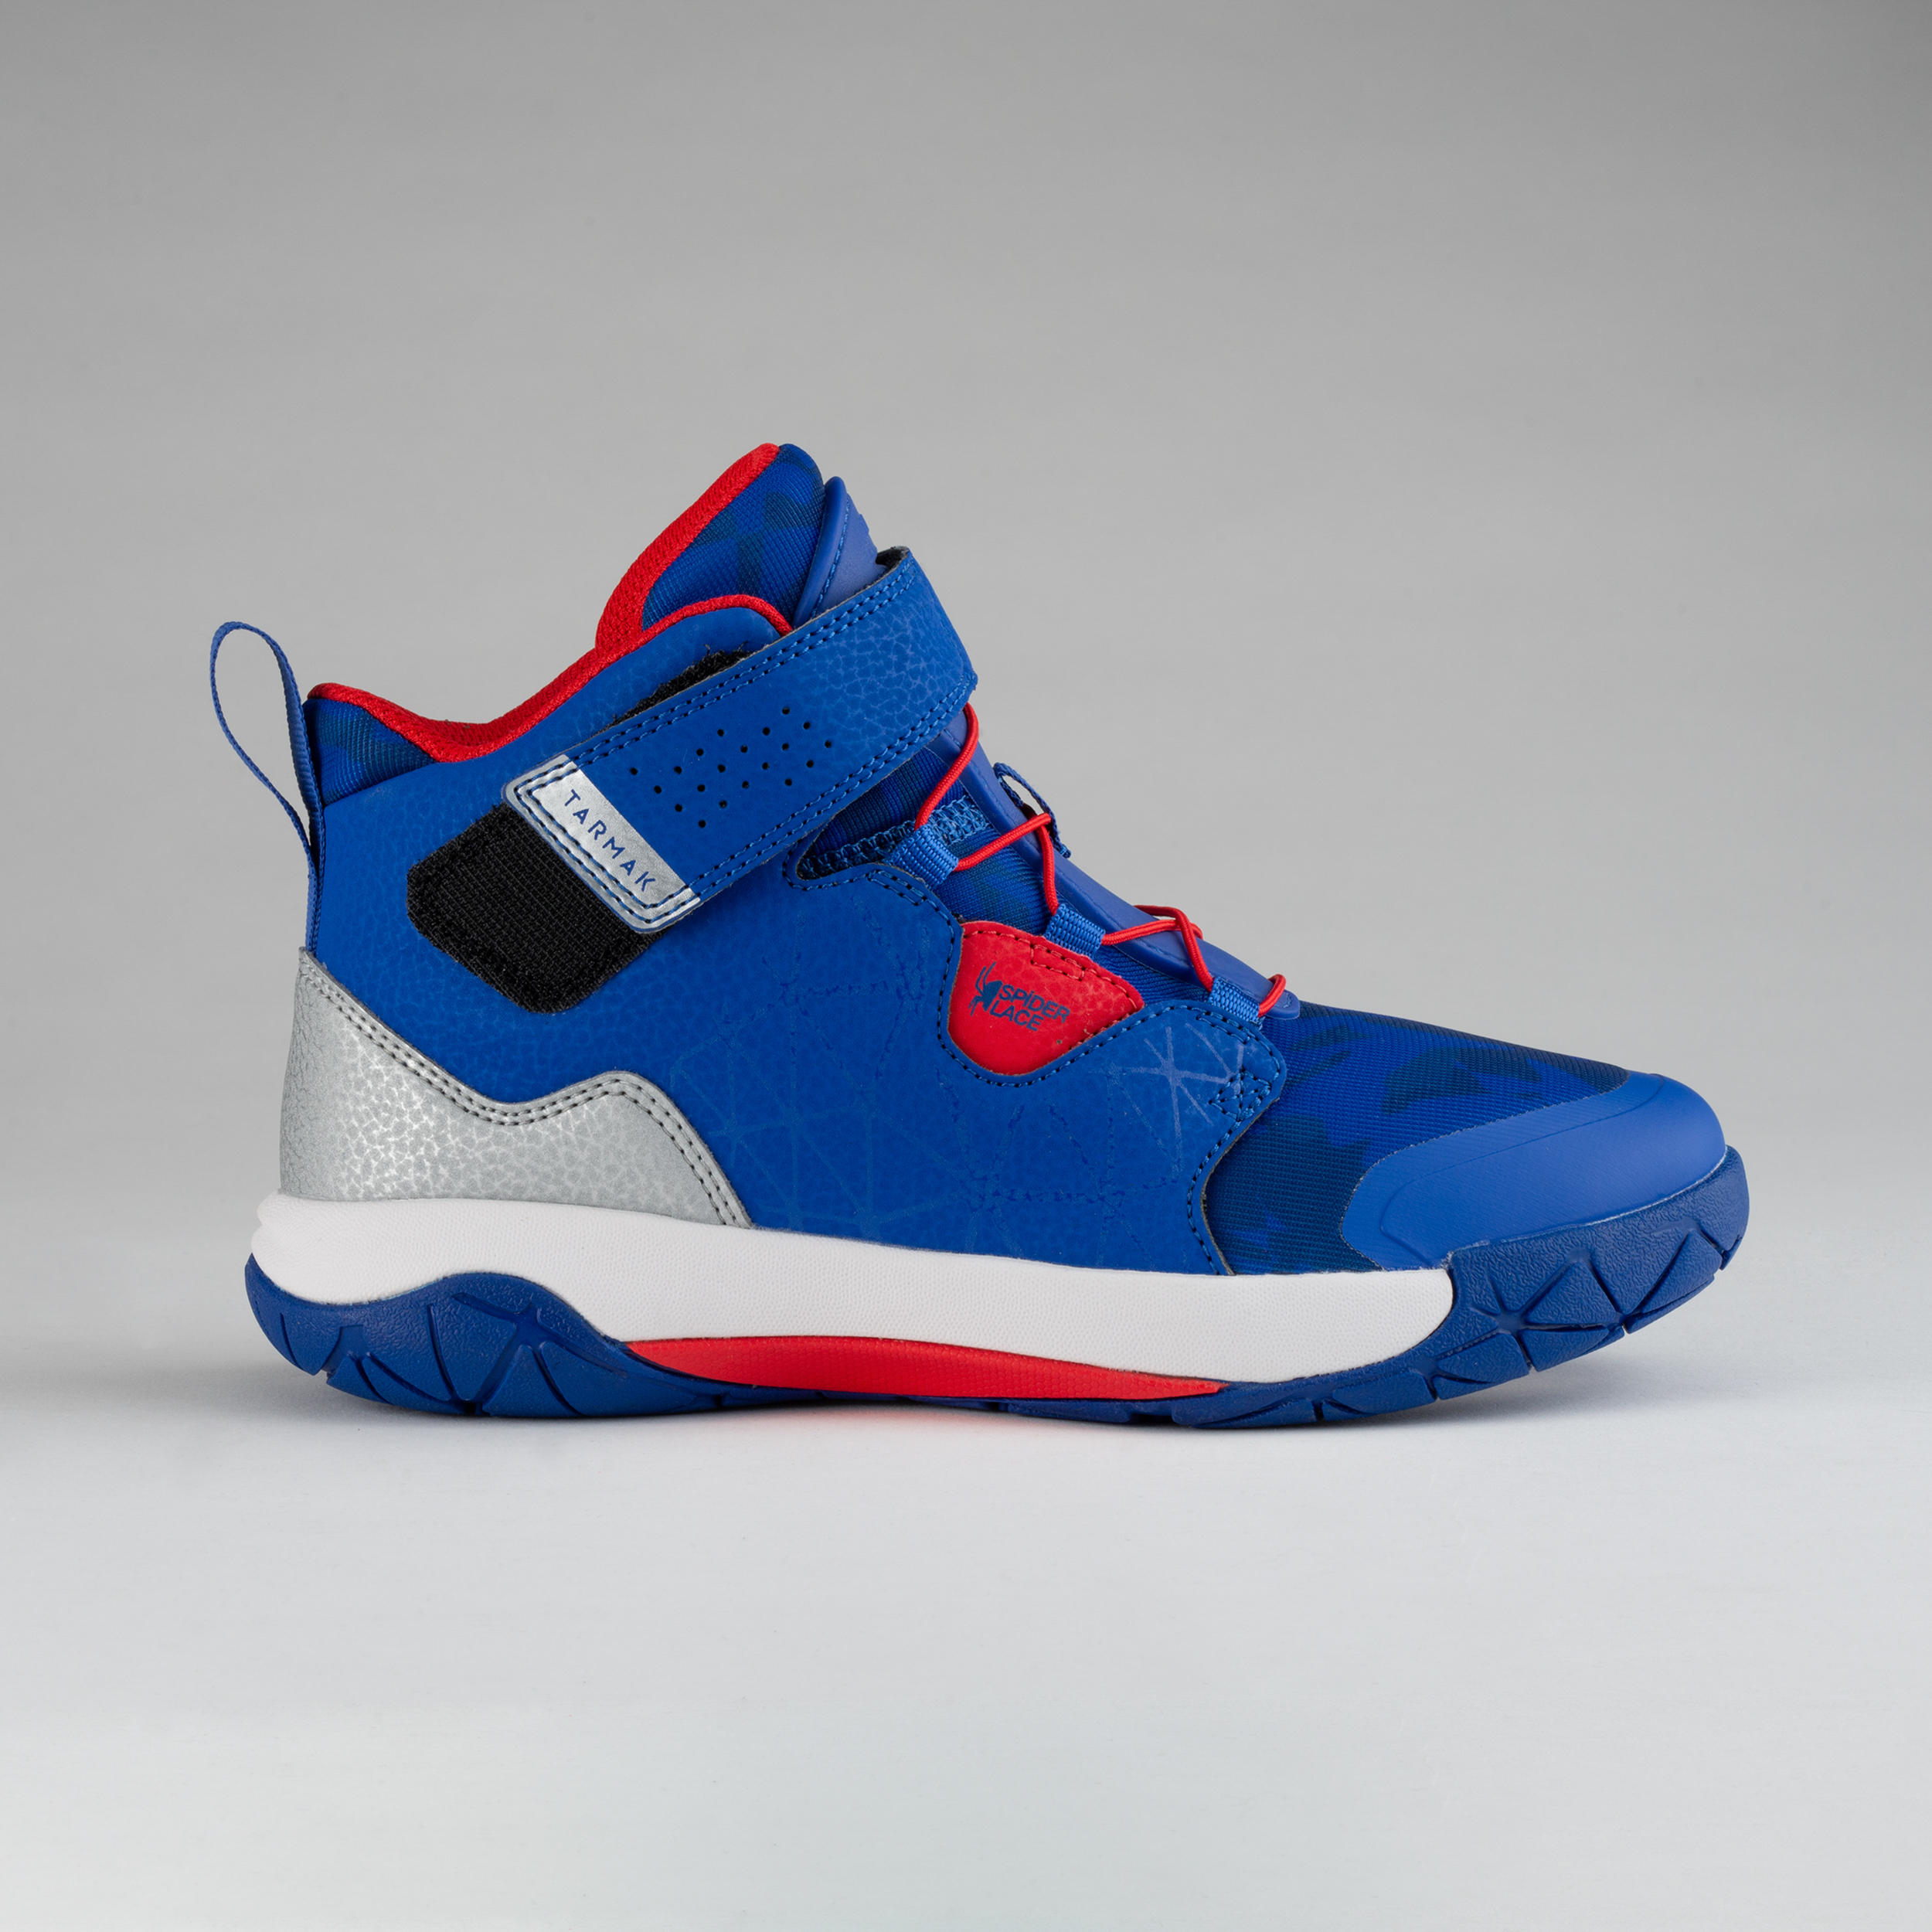 Boys'/Girls' Intermediate Basketball Shoes - Blue/Red Spider Lace 1/9